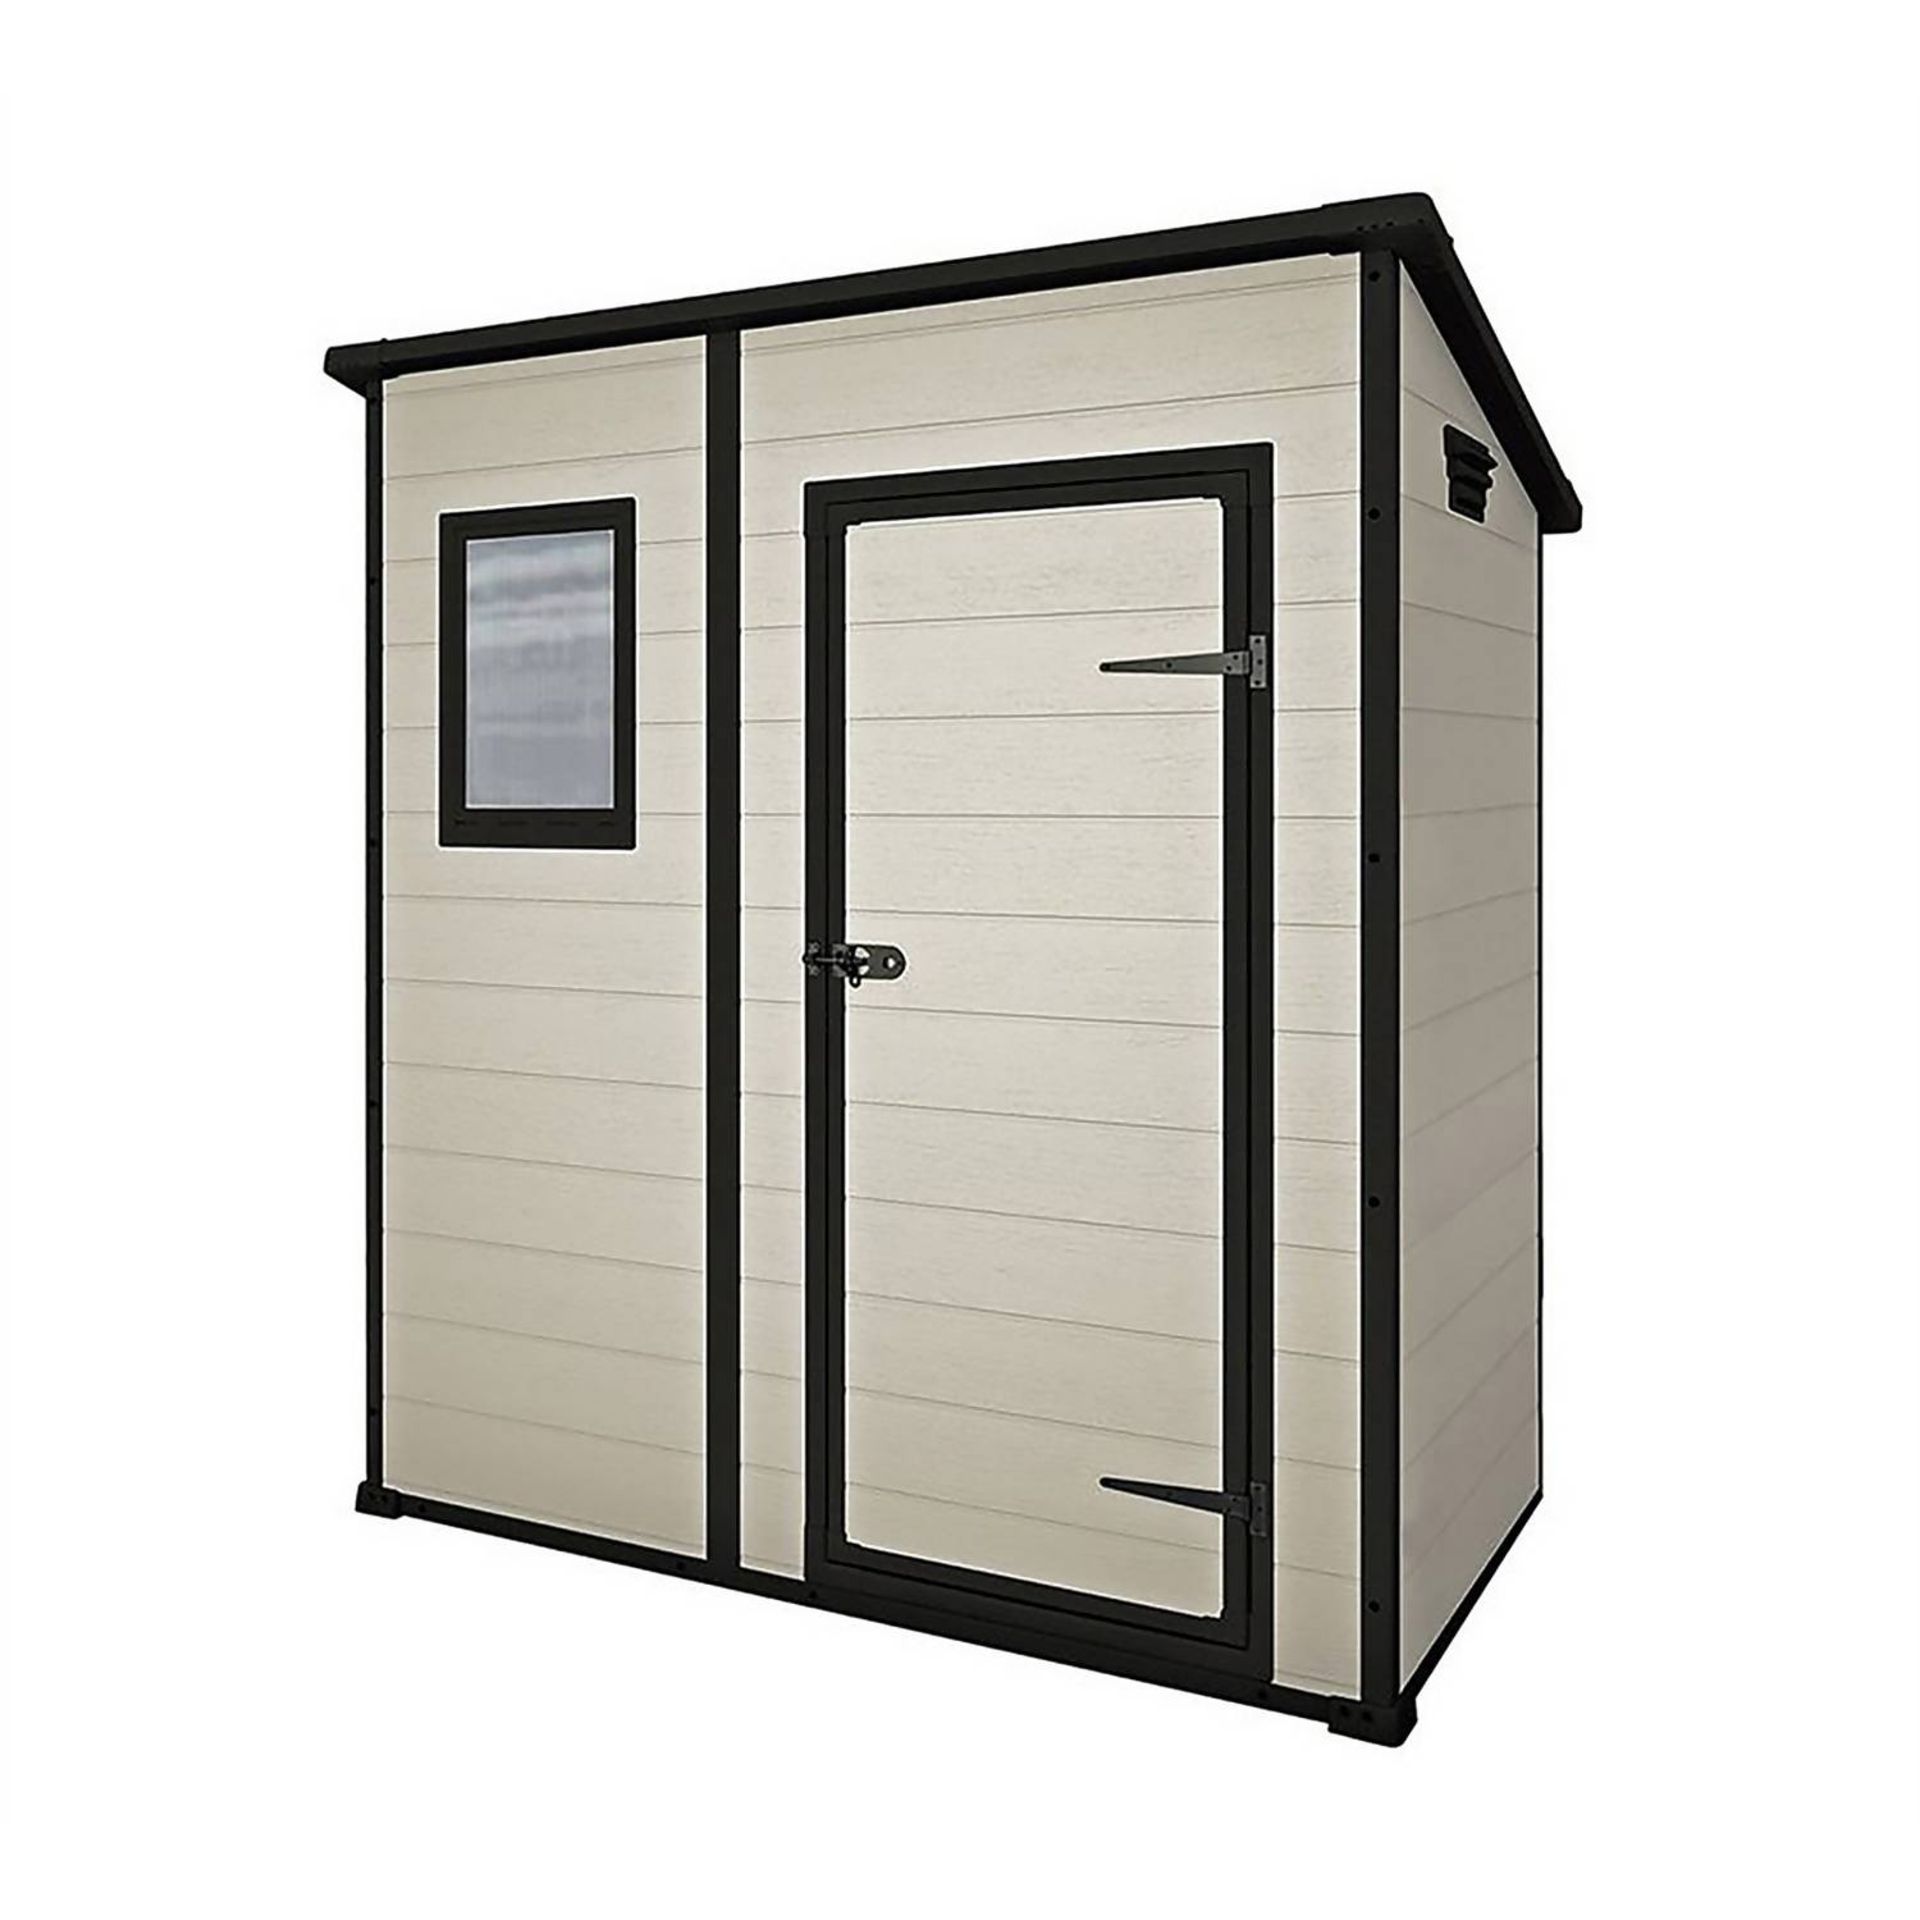 (R16) 1x Keter Manor Pent Garden Storage Shed 6x4 Beige Brown RRP £350 (Box Open – Unsure If Comple